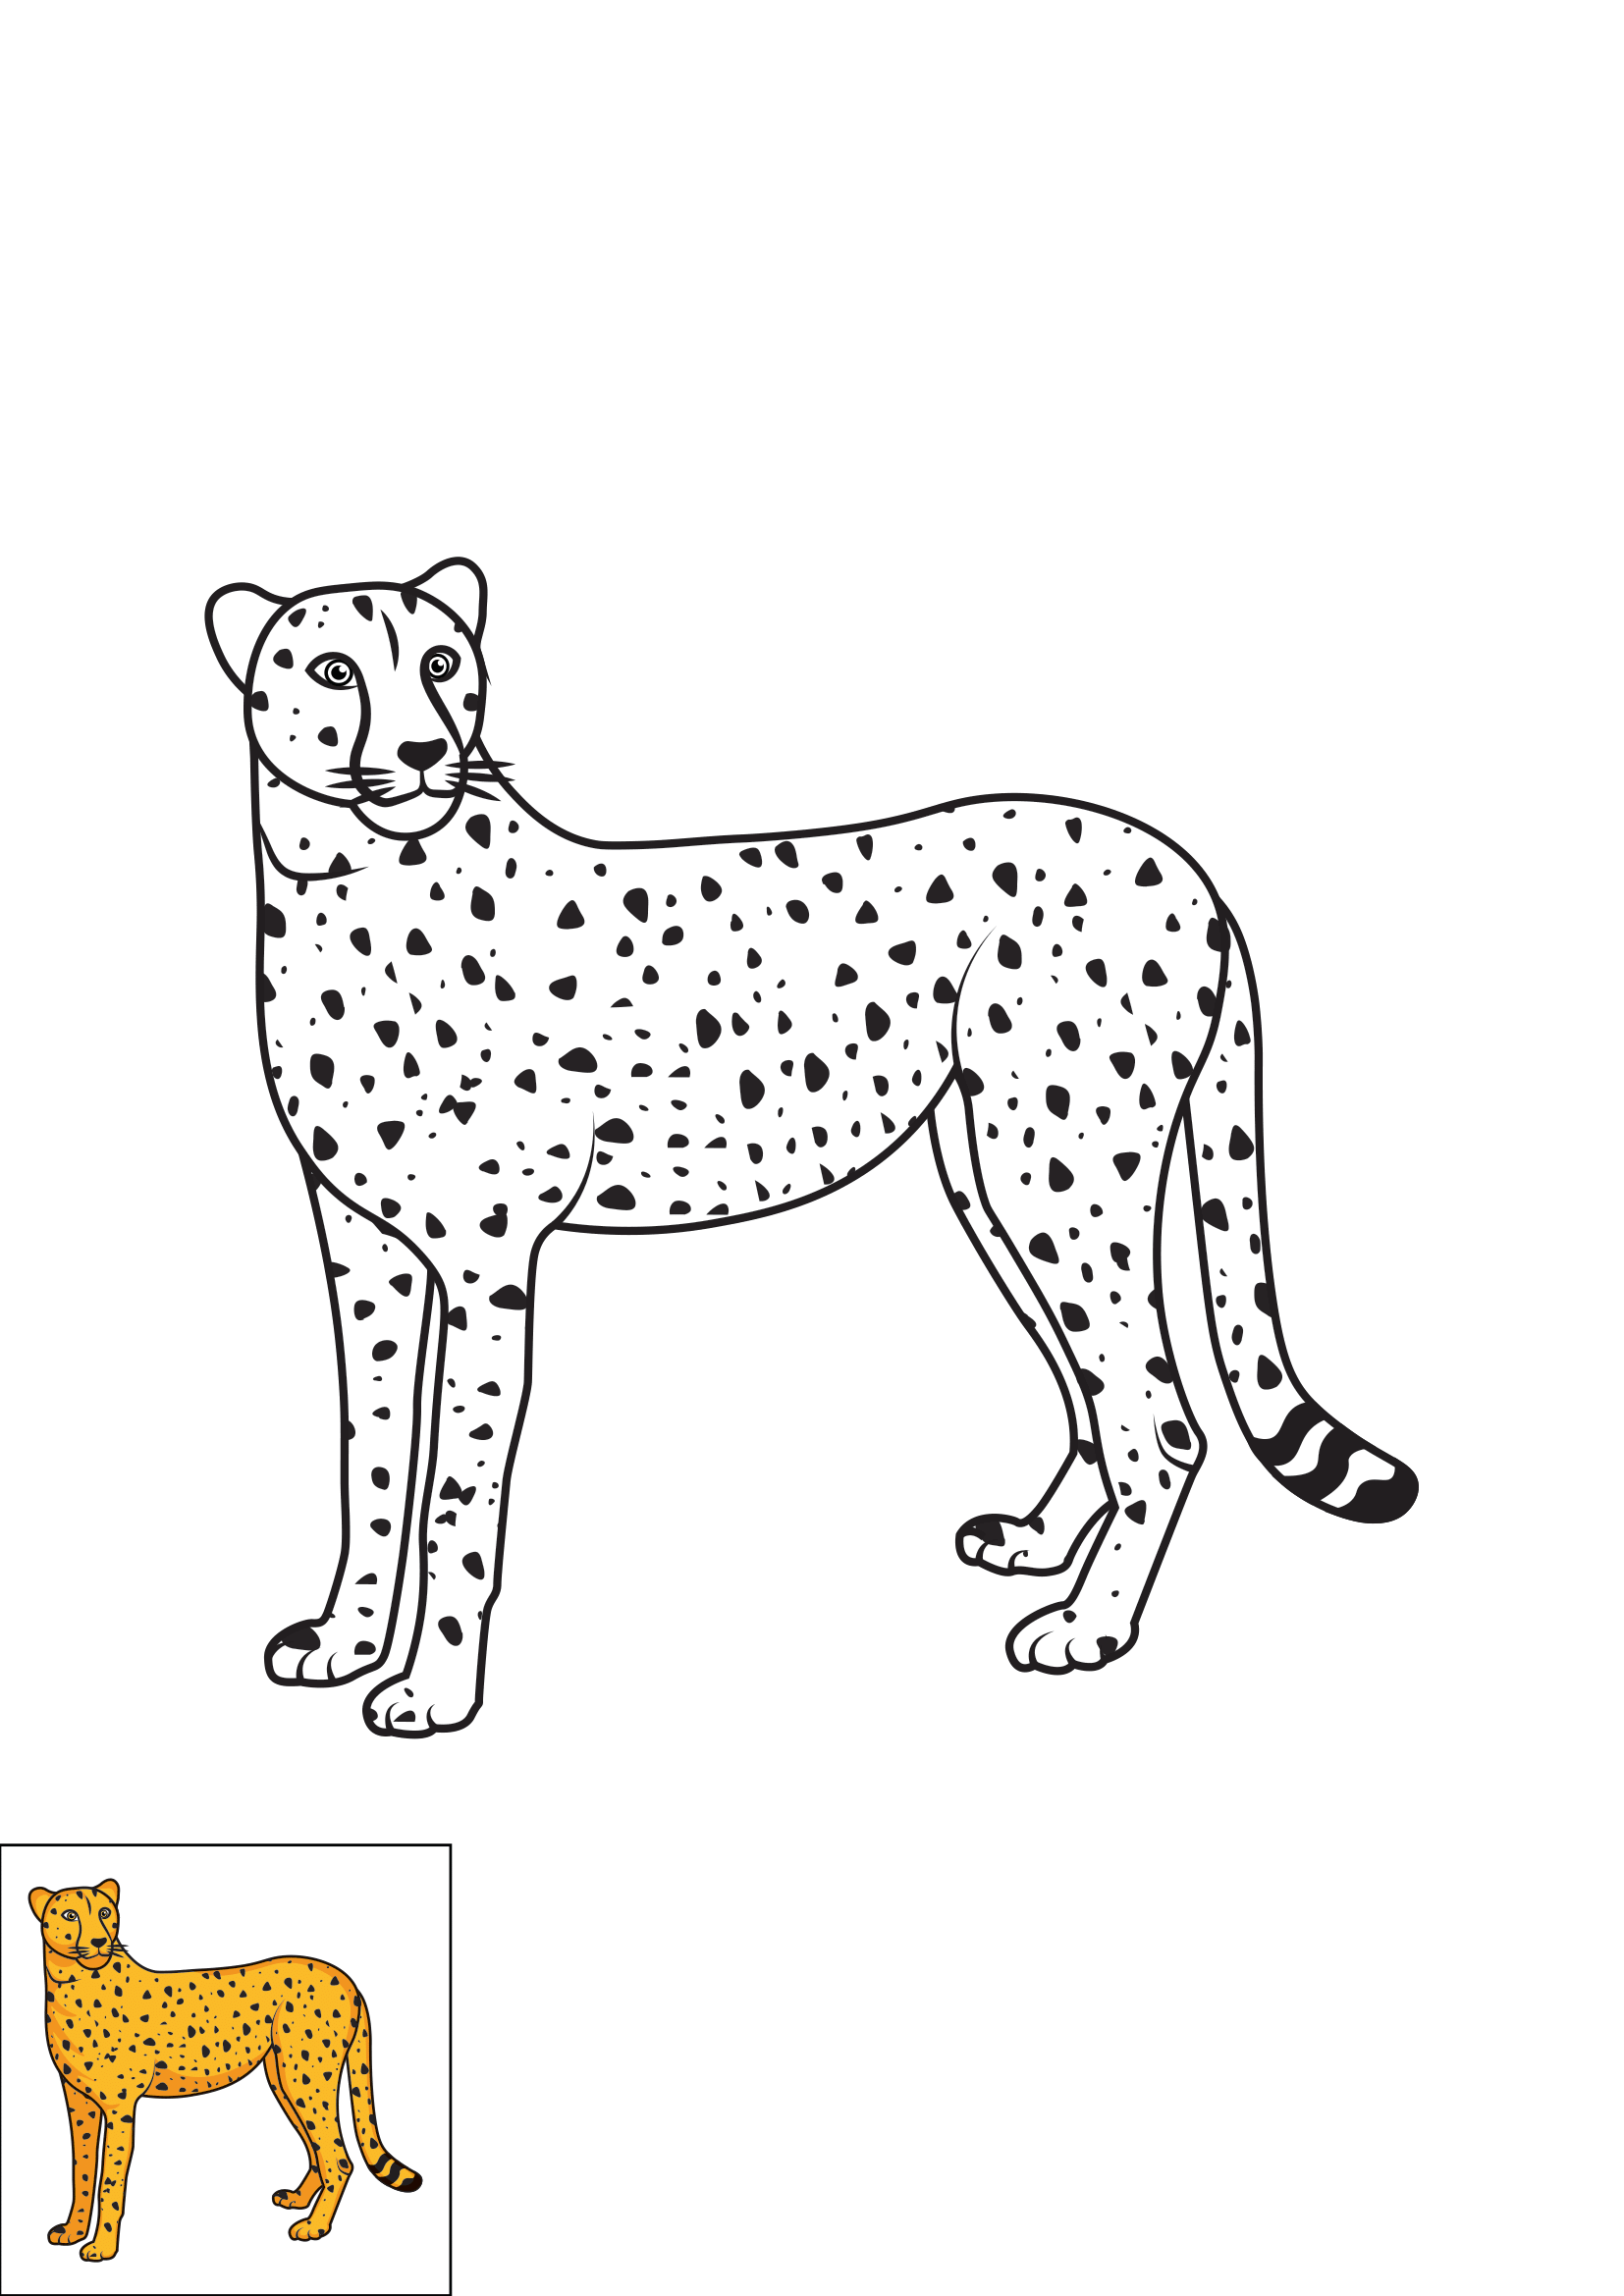 How to Draw A Cheetah Step by Step Printable Color